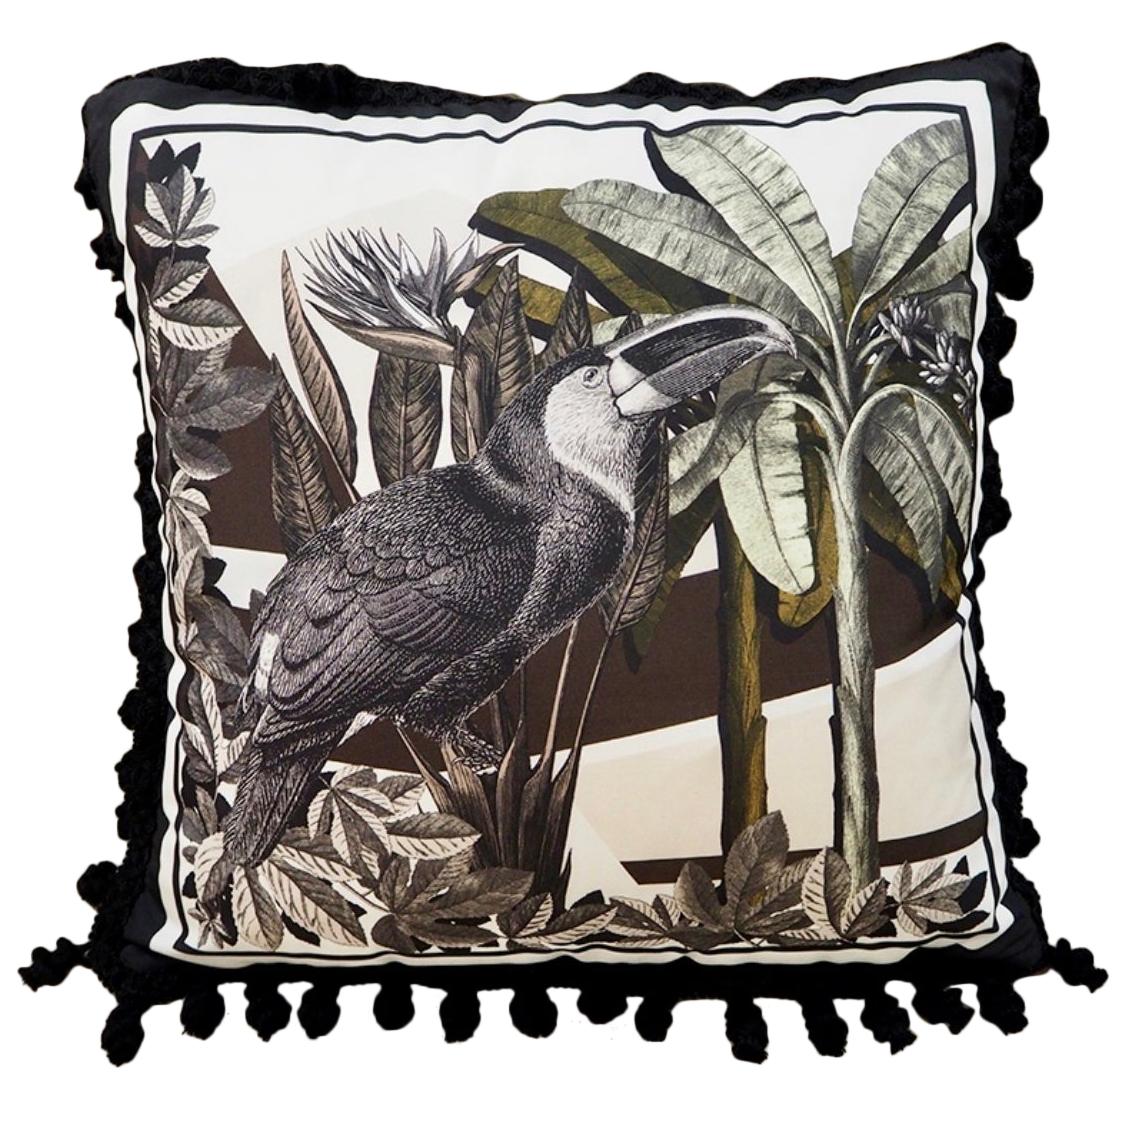 Italian Handmade Contemporary Style Black and Wild Collection Pillow